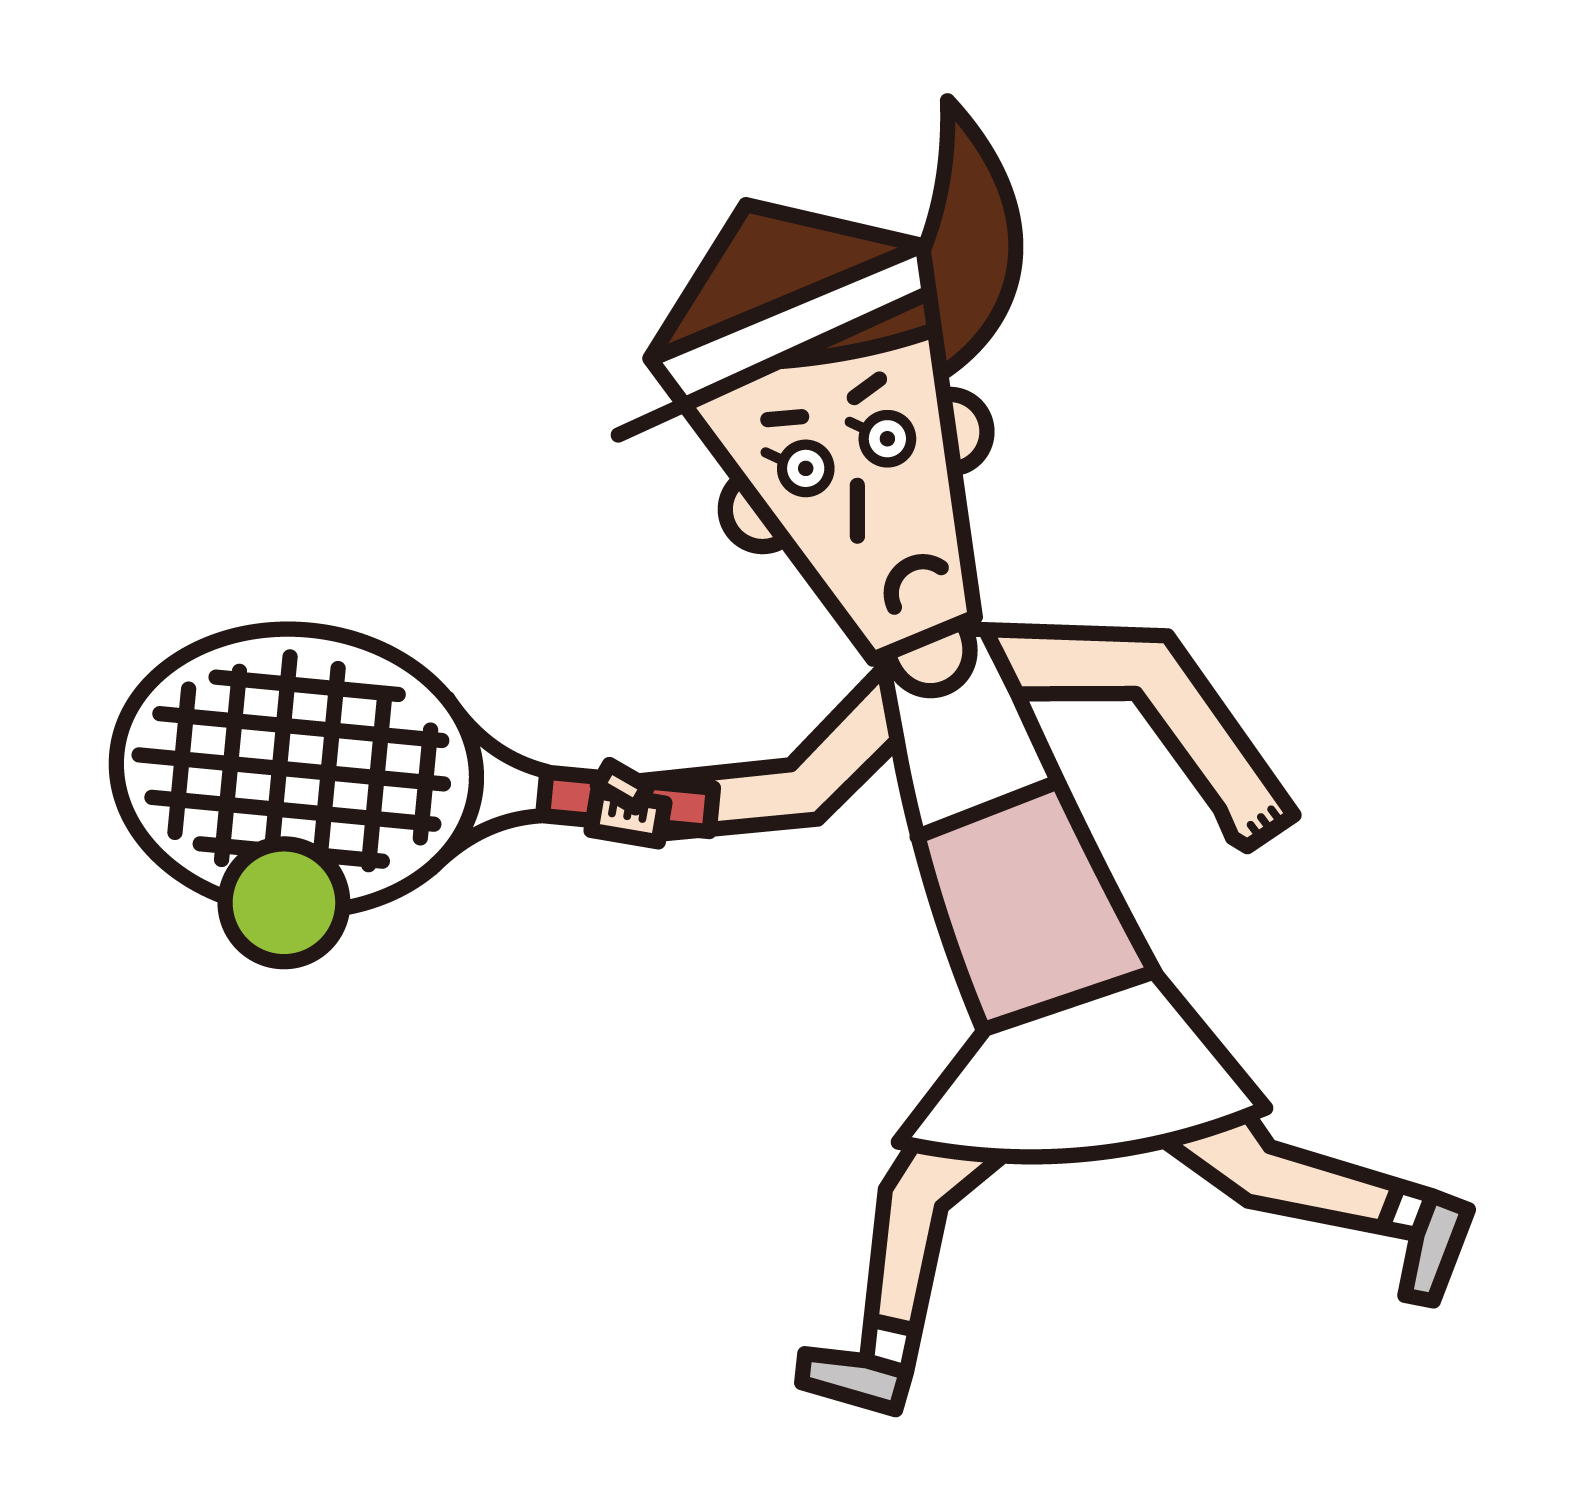 Illustration of a tennis player (female) hitting the ball back